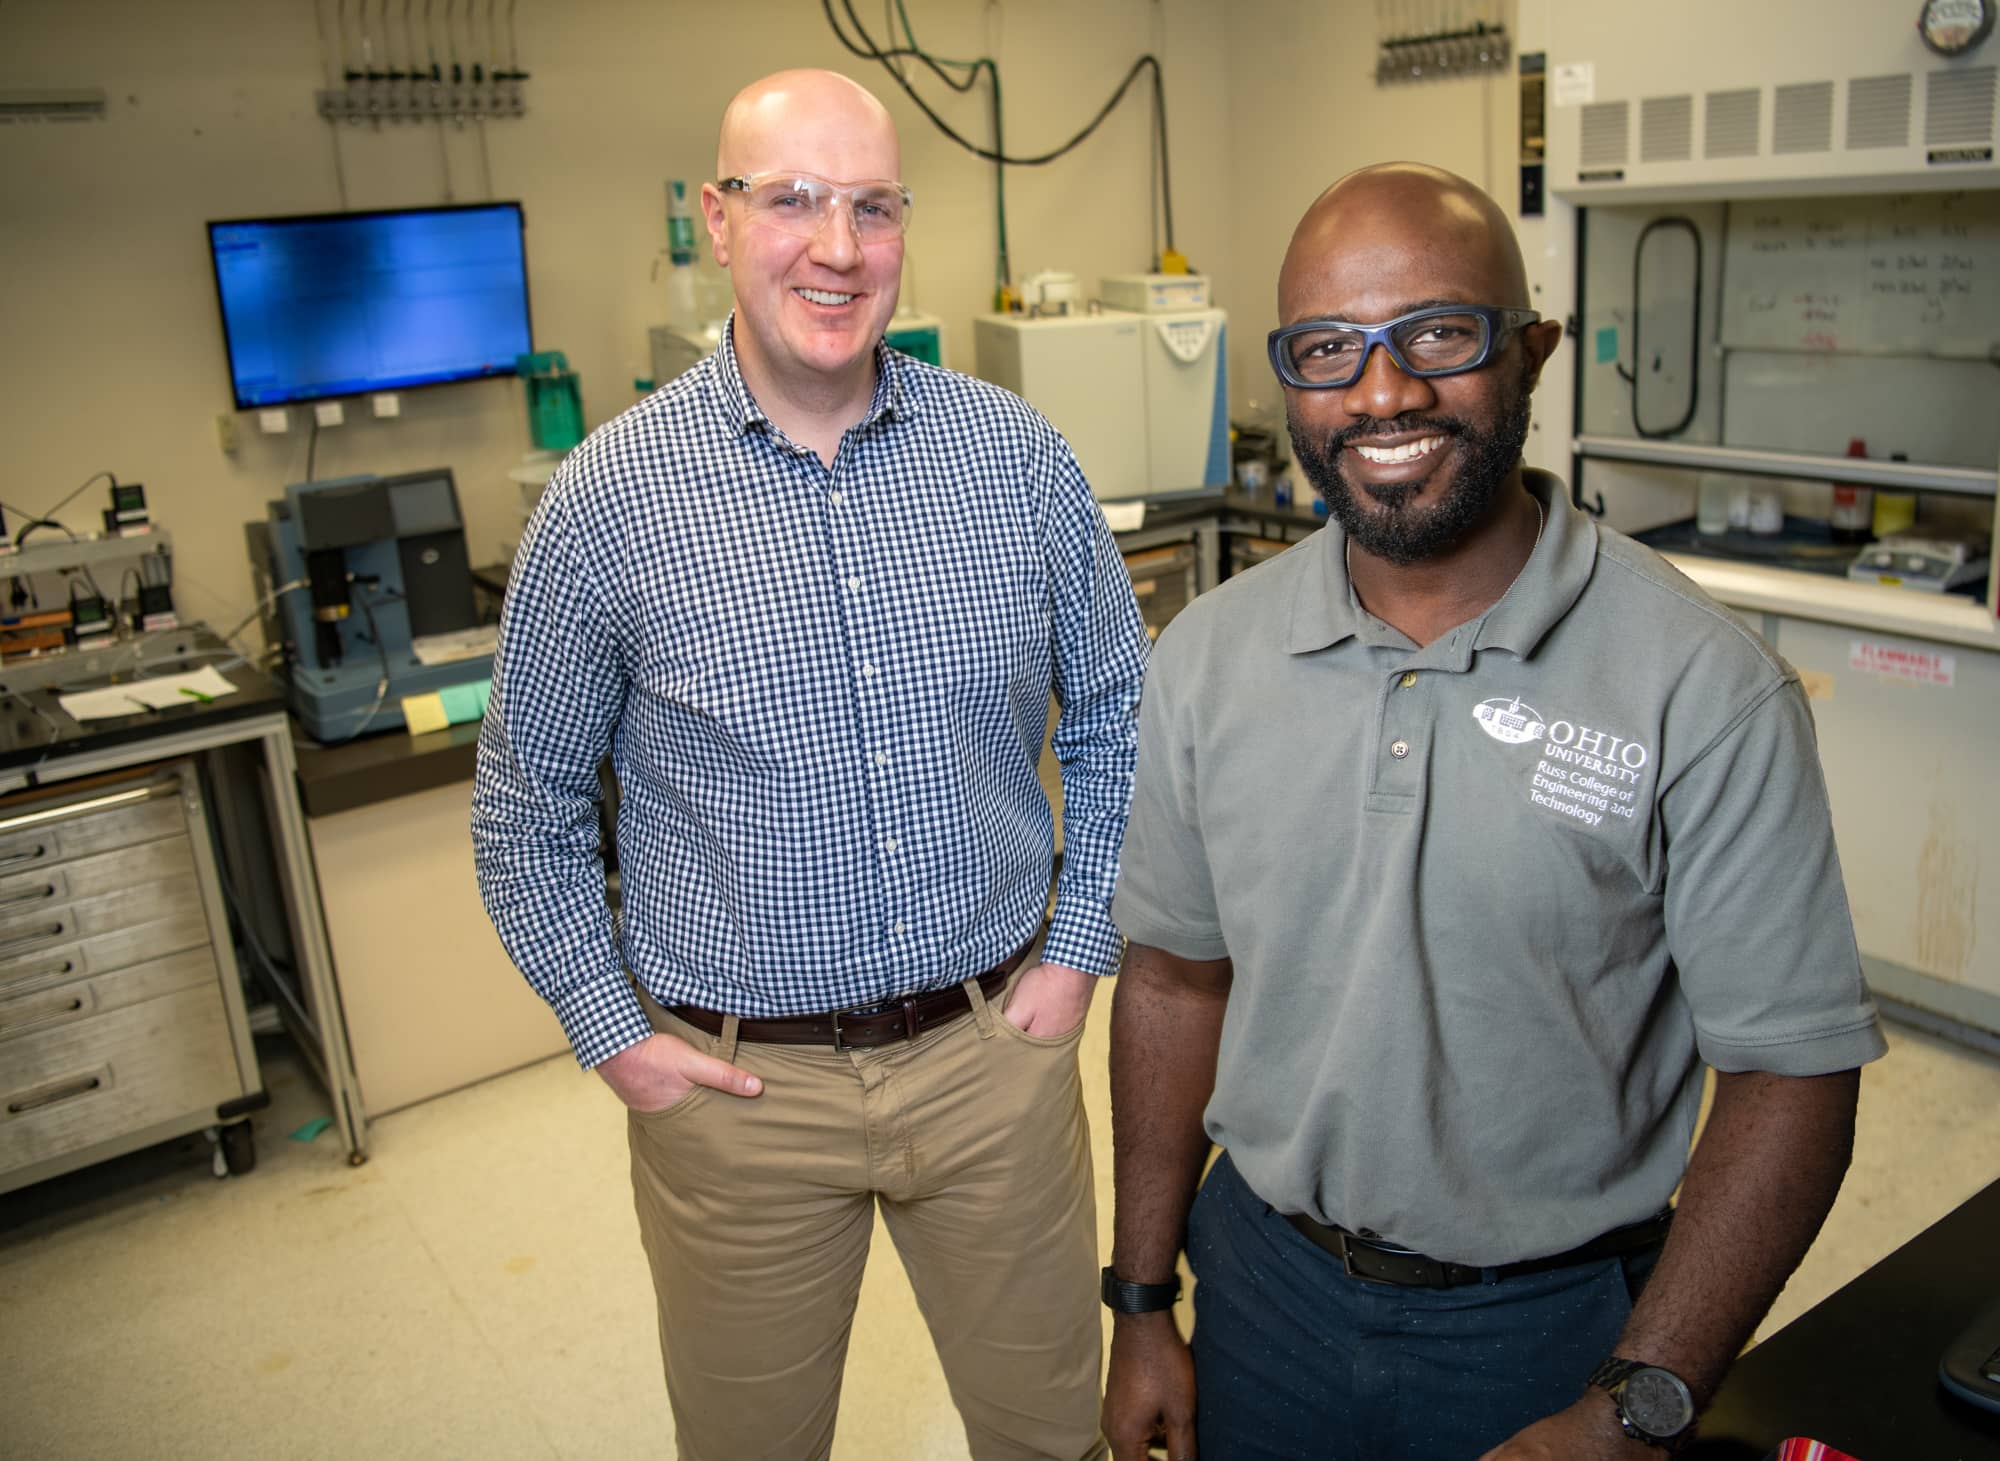 Russ College of Engineering professors Jason Trembly, Ph.D., left, and Damilola Daramola, Ph.D., were recently awarded more than $1 million in grants to develop sustainable construction materials.